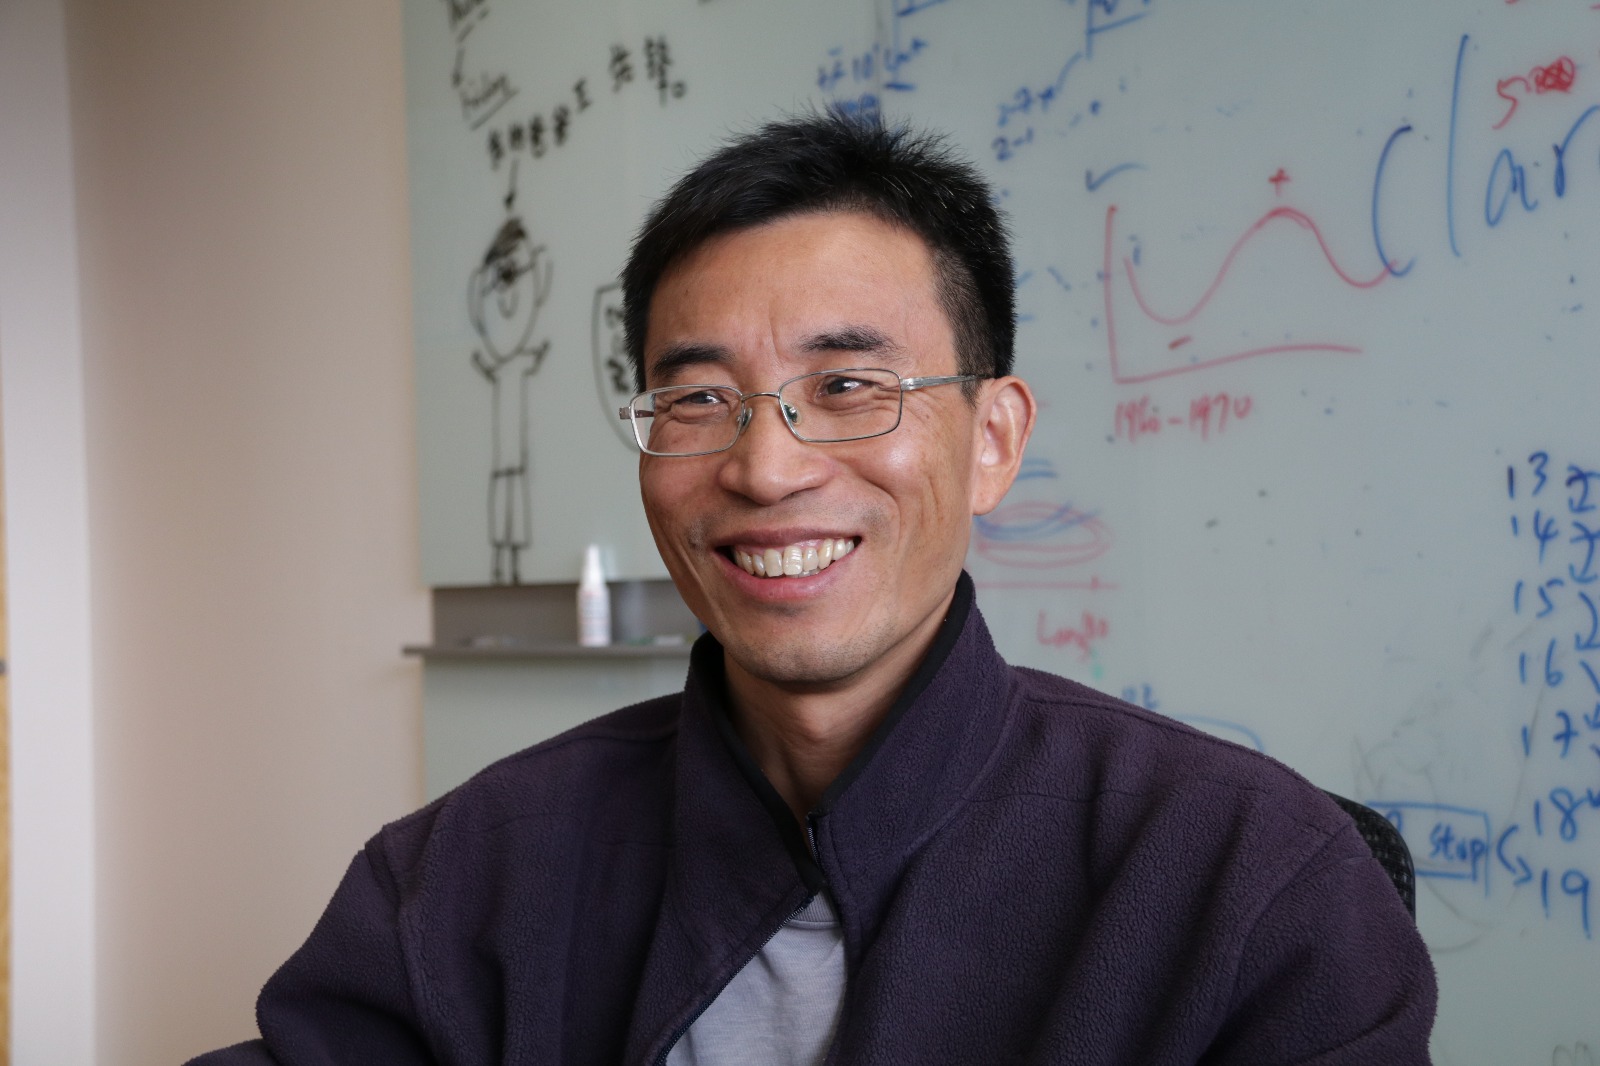 Asst. Prof Wang is a Principal Investigator at the Earth Observatory of Singapore (Source: Rachel Siao)